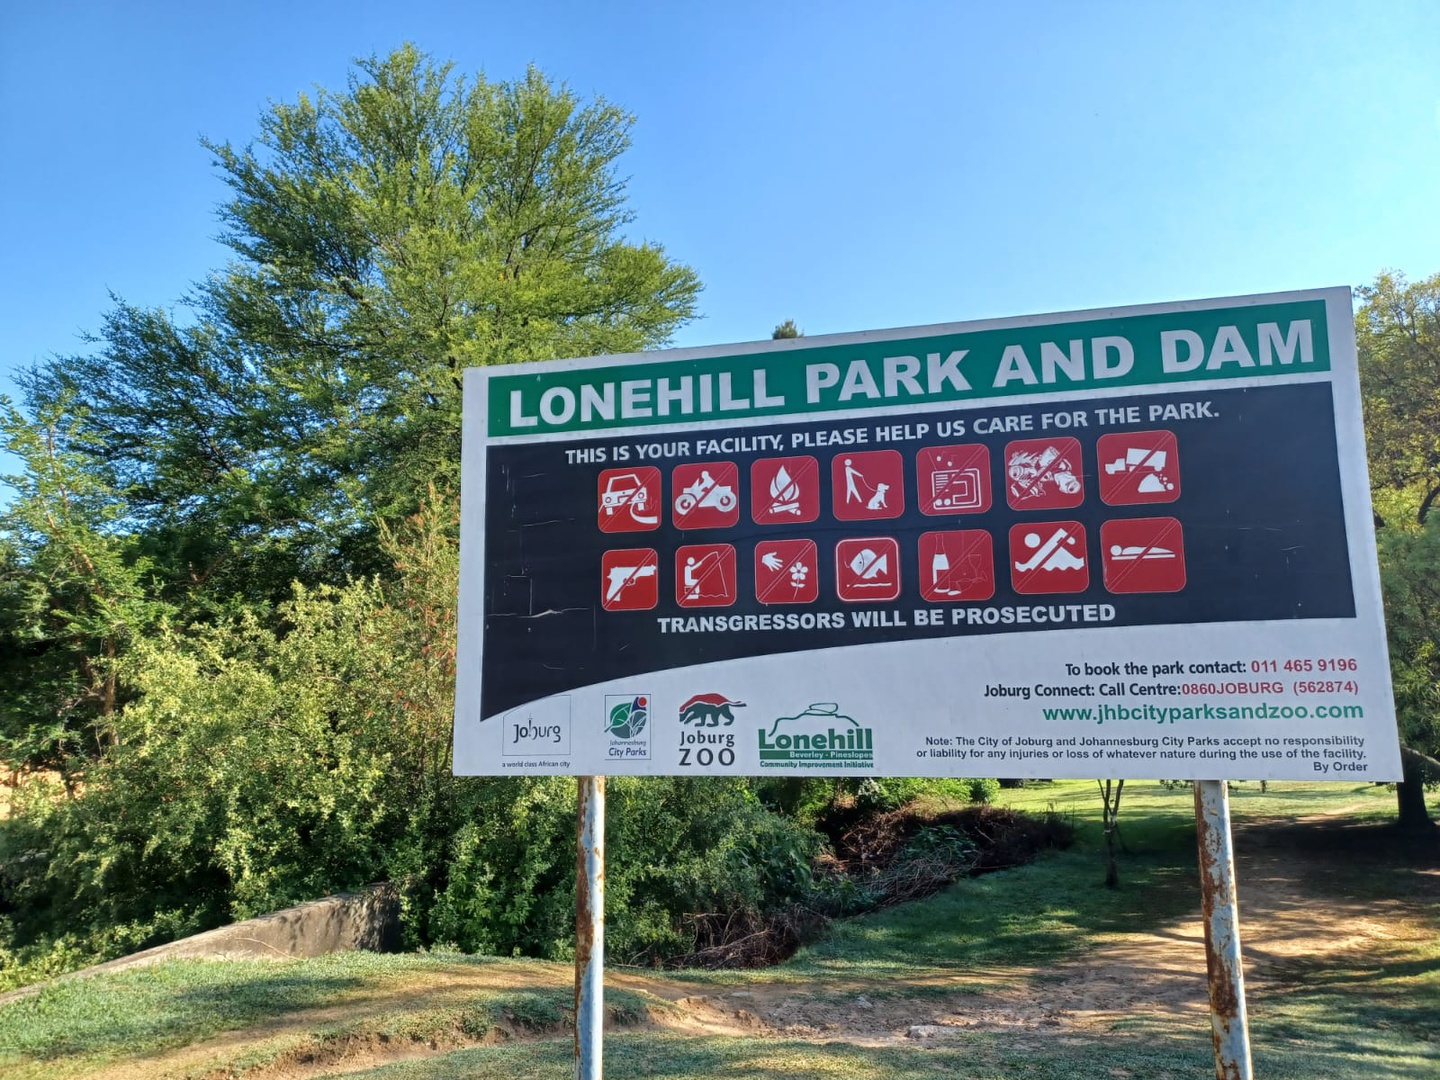 House in Lonehill - Lonehill Park and Dam